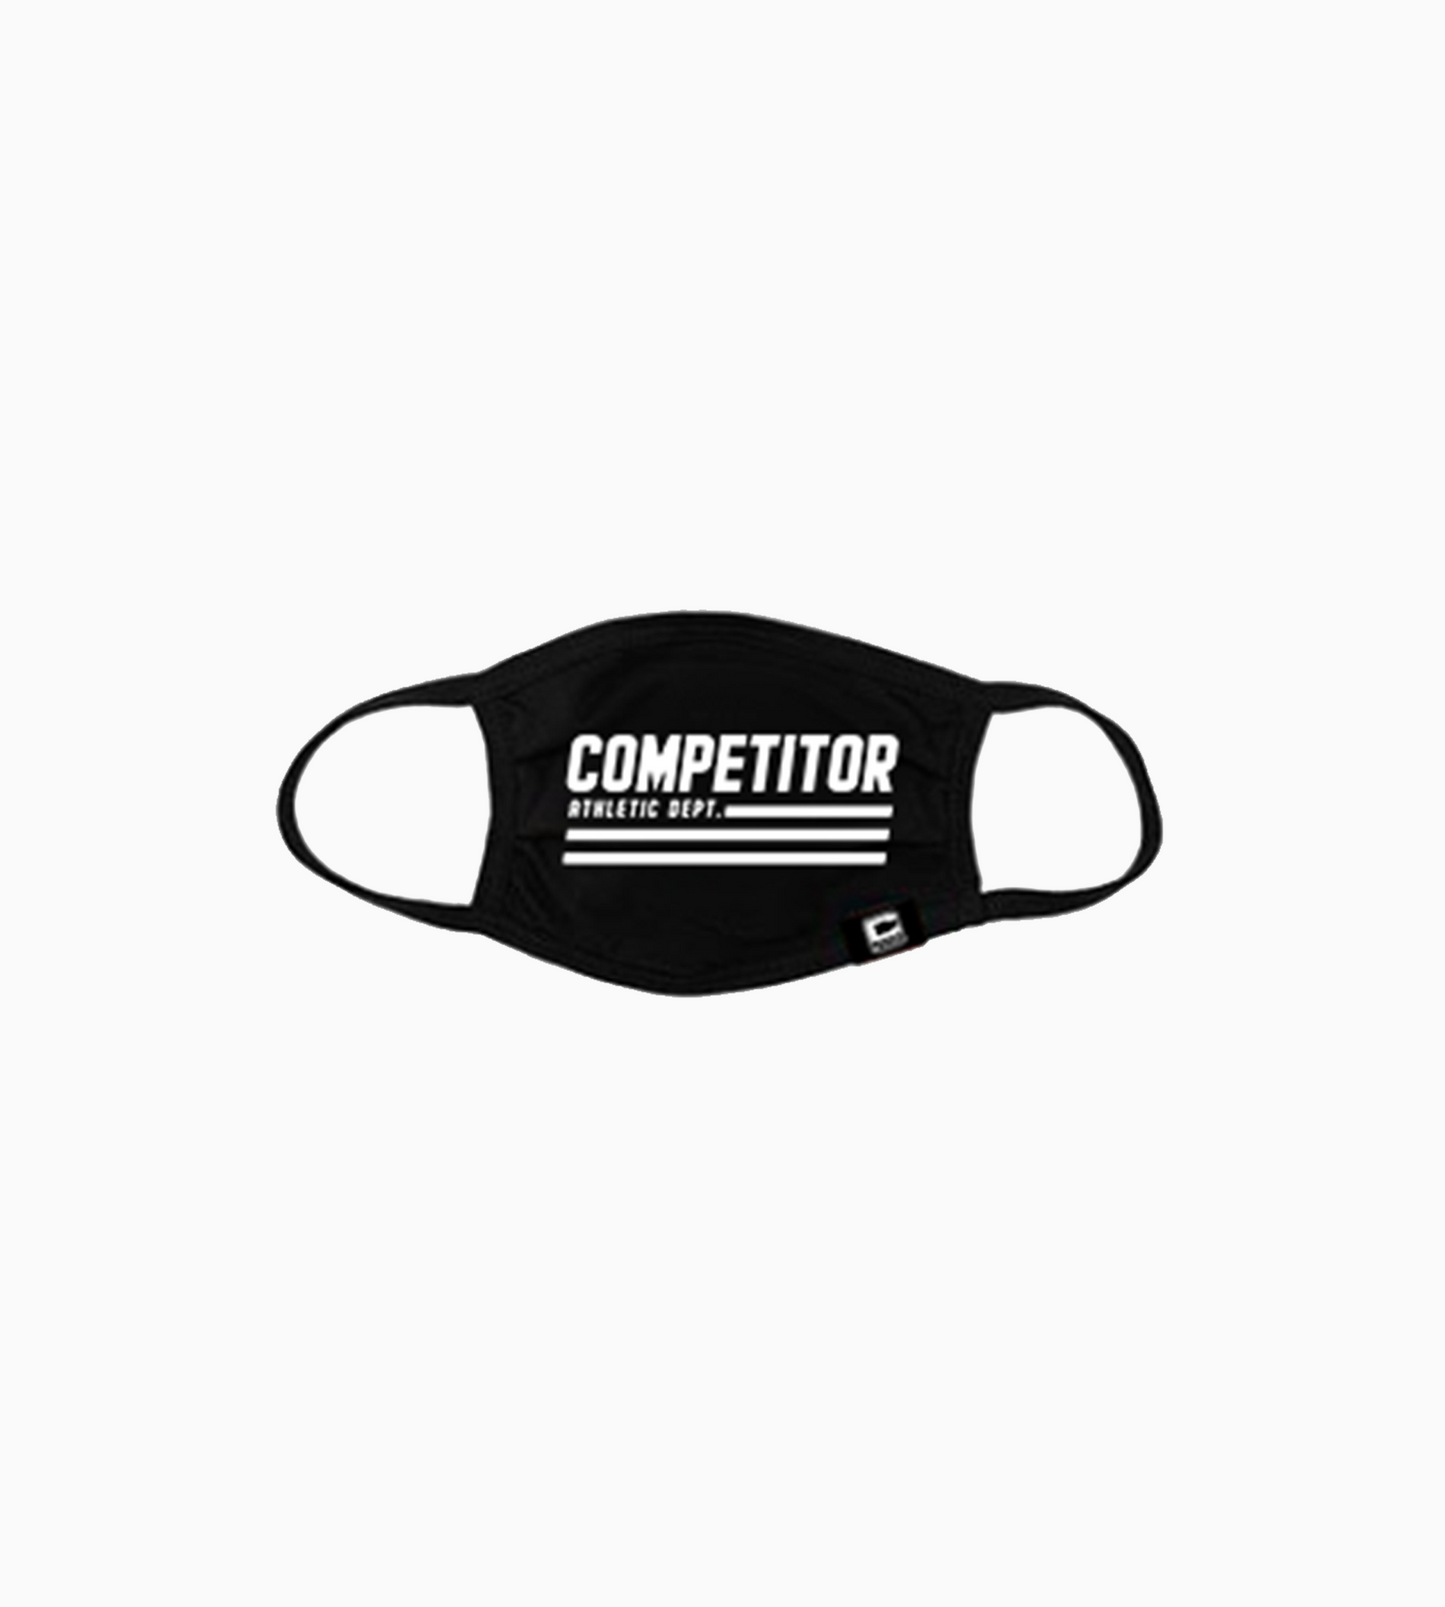 Competitor Flag Mask